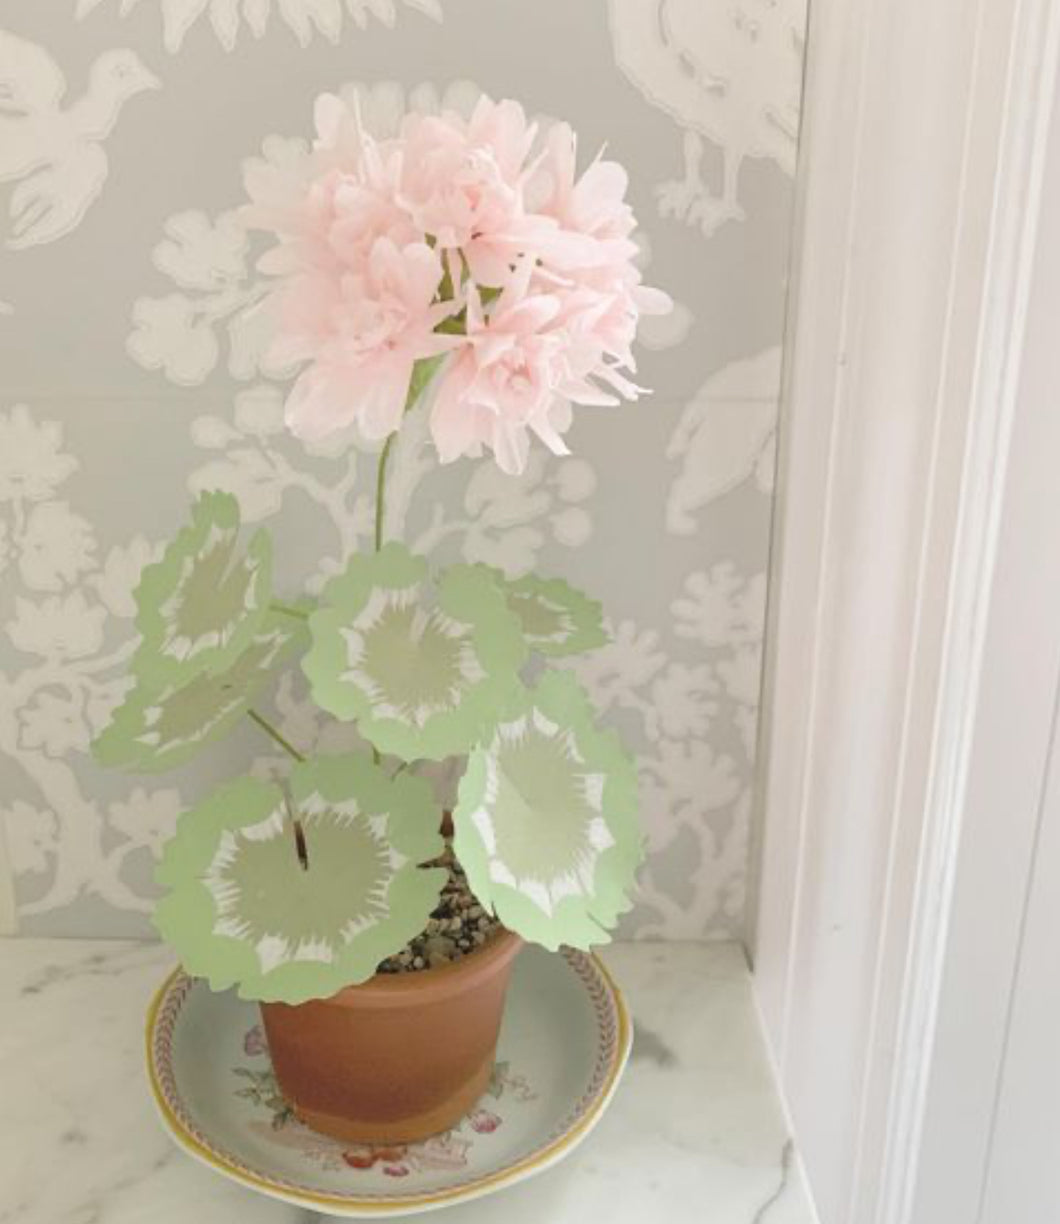 Paper Geranium - Small blush blossom with moss and mint leaves